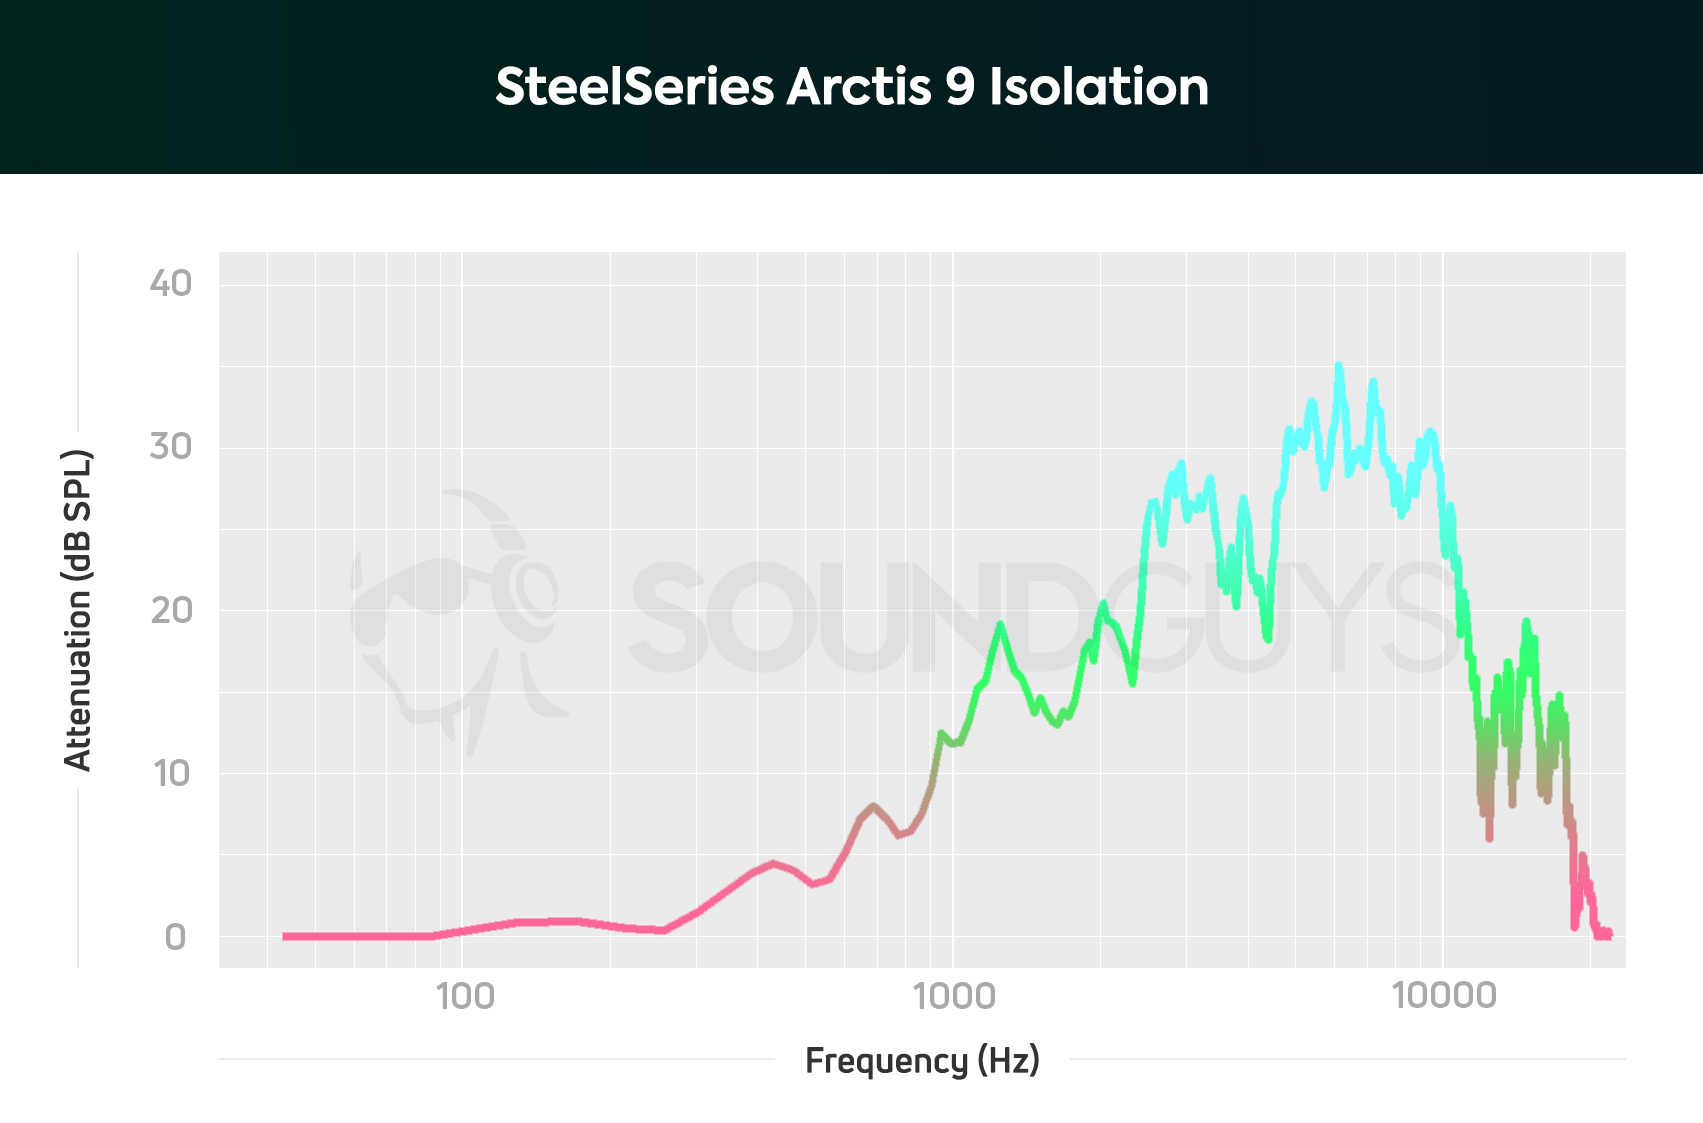 An isolation chart for the SteelSeries Arctis 9 gaming headset, which shows relatively poor attenuation.